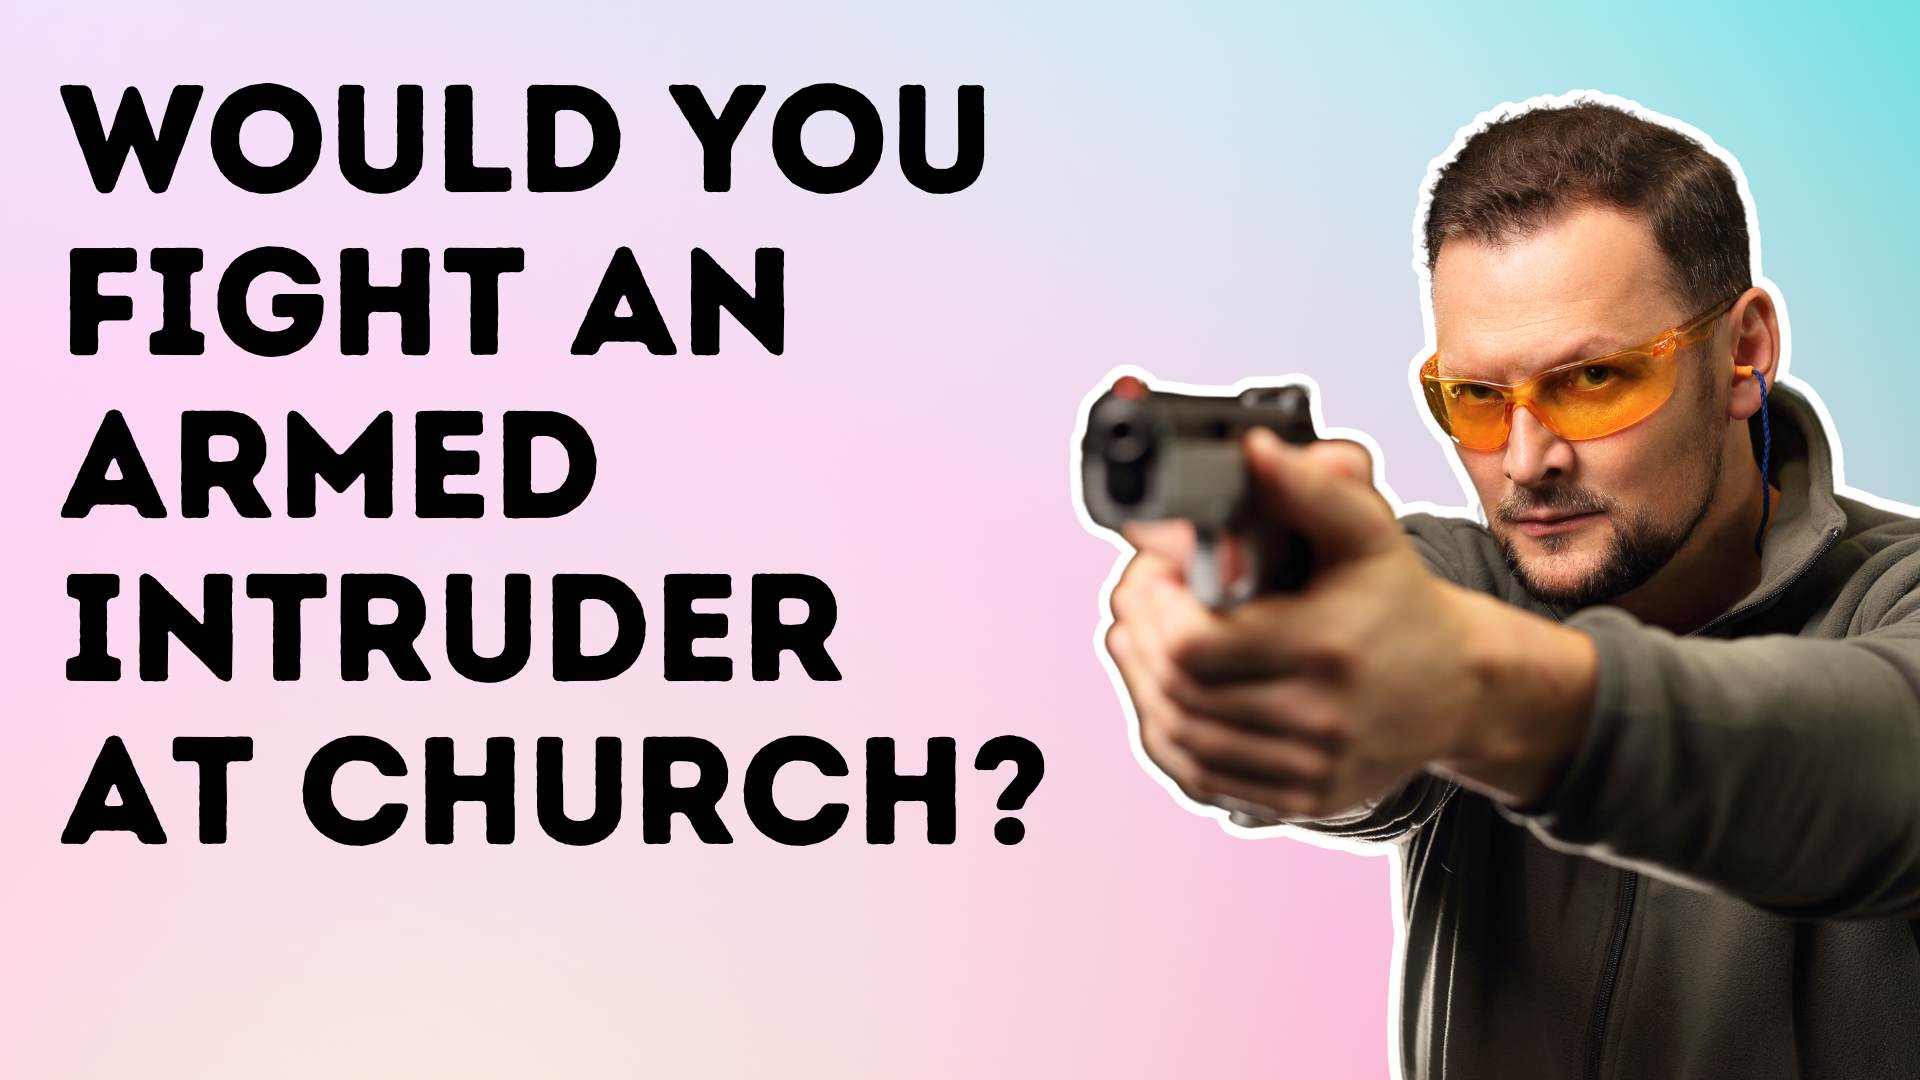 Would YOU fight an armed intruder at church?